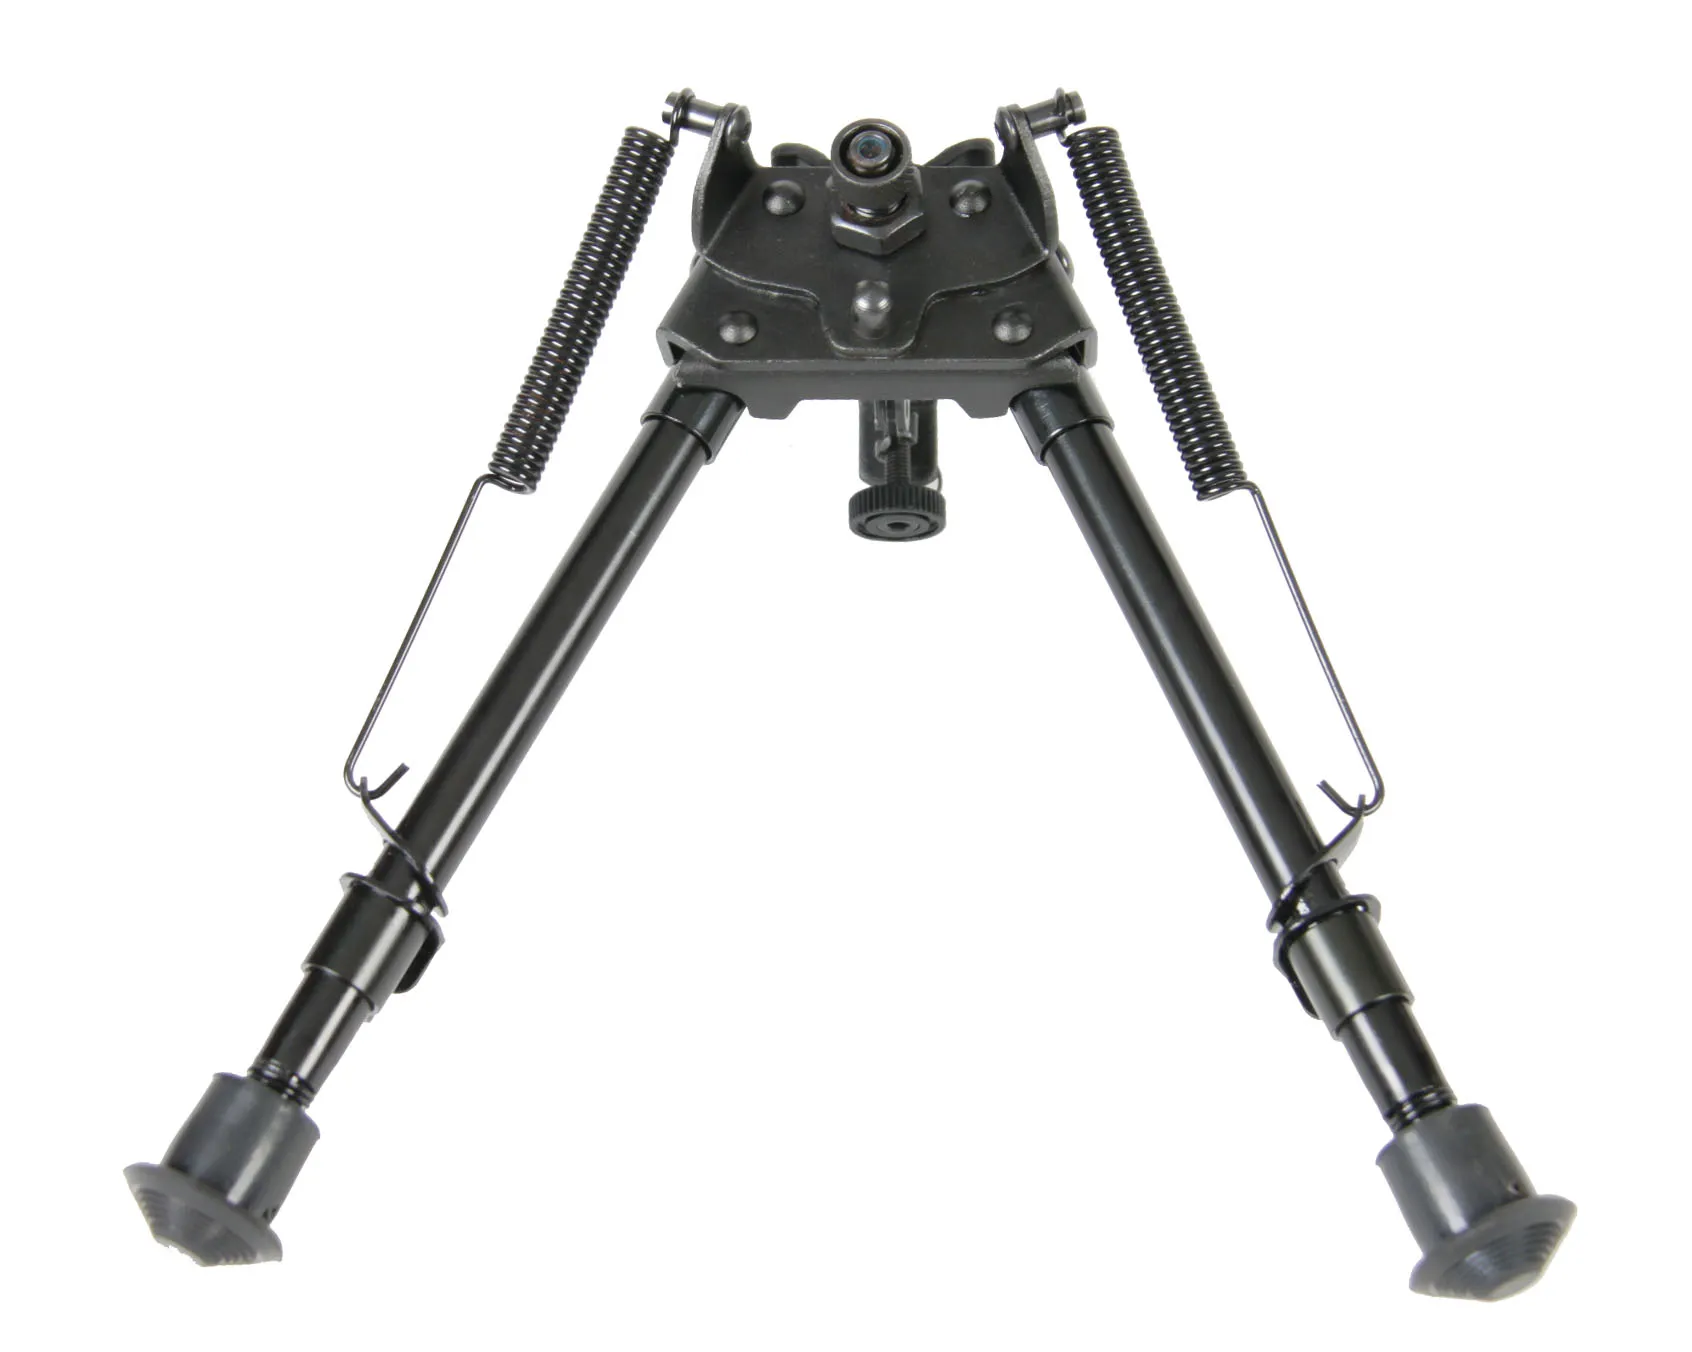 New Arrival Tactical 9 inch M3 Bipod Rifle Stand Airsoft Bipod Black Color for Hunting Sport CL17-0011